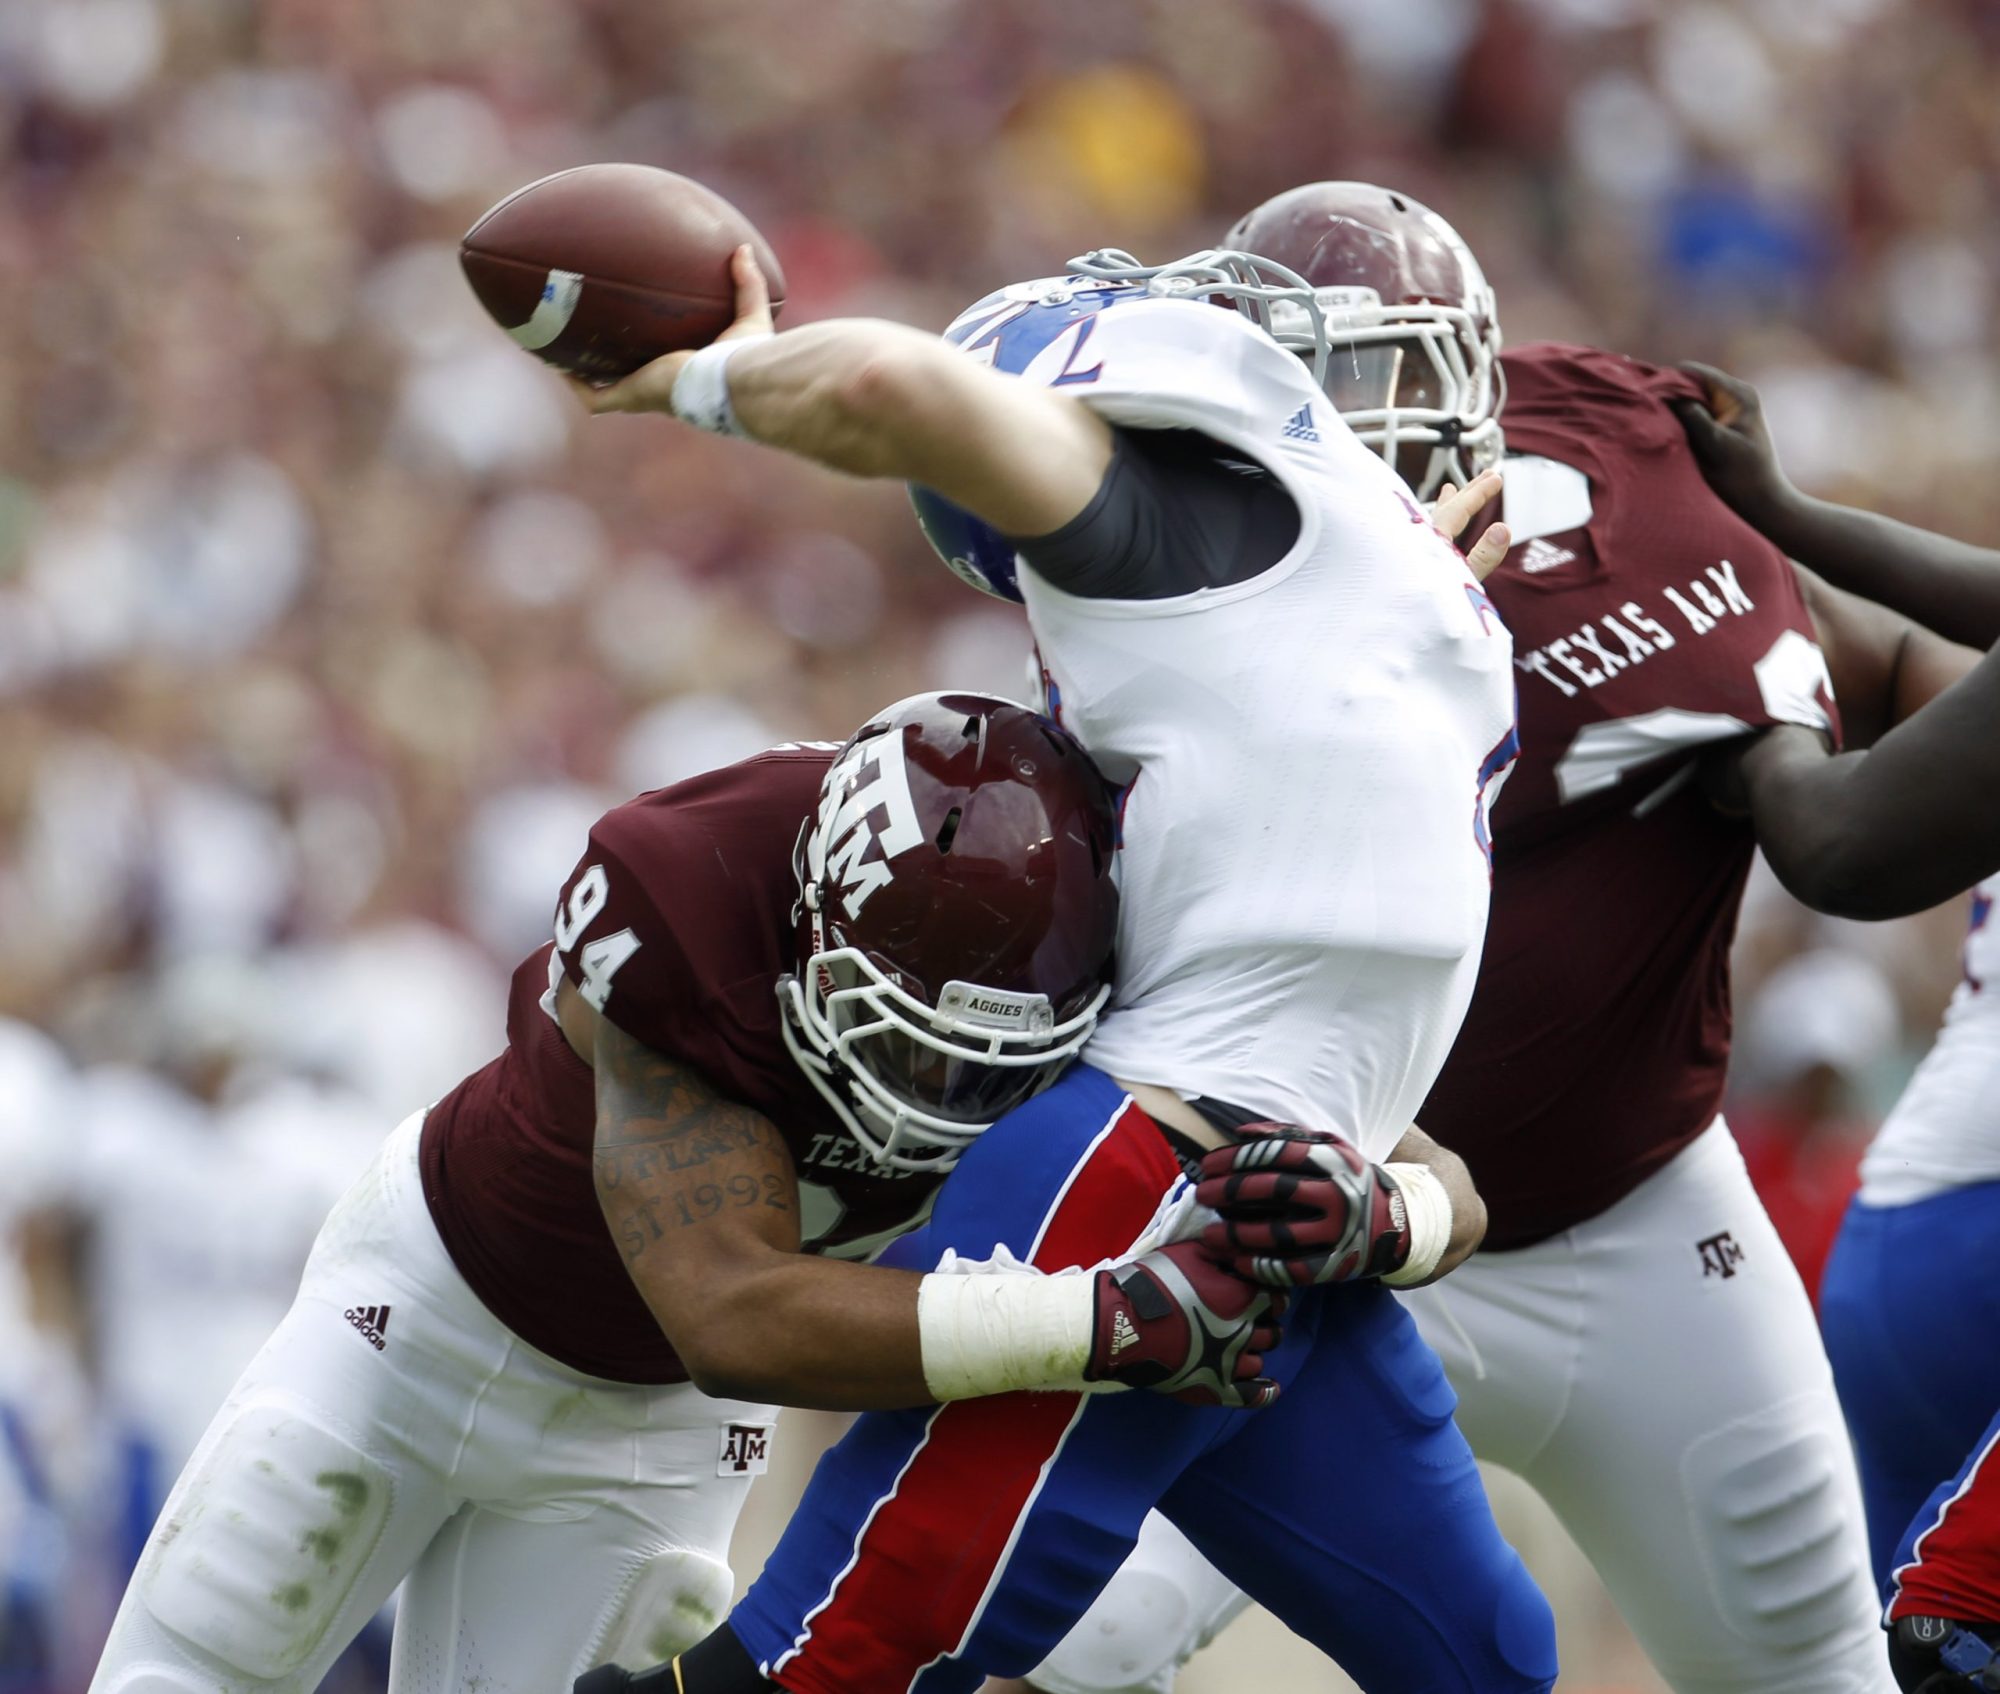 Kansas QB Jordan Webb (2) is sacked by Texas A&M Aggies linebacker Damontre Moore (94) and was off the field with an injury after getting sacked during the first half of the college football game at Texas A&M, Nov. 19, 2011. Photo by Karen Warren/Houston Chronicle via Getty Images